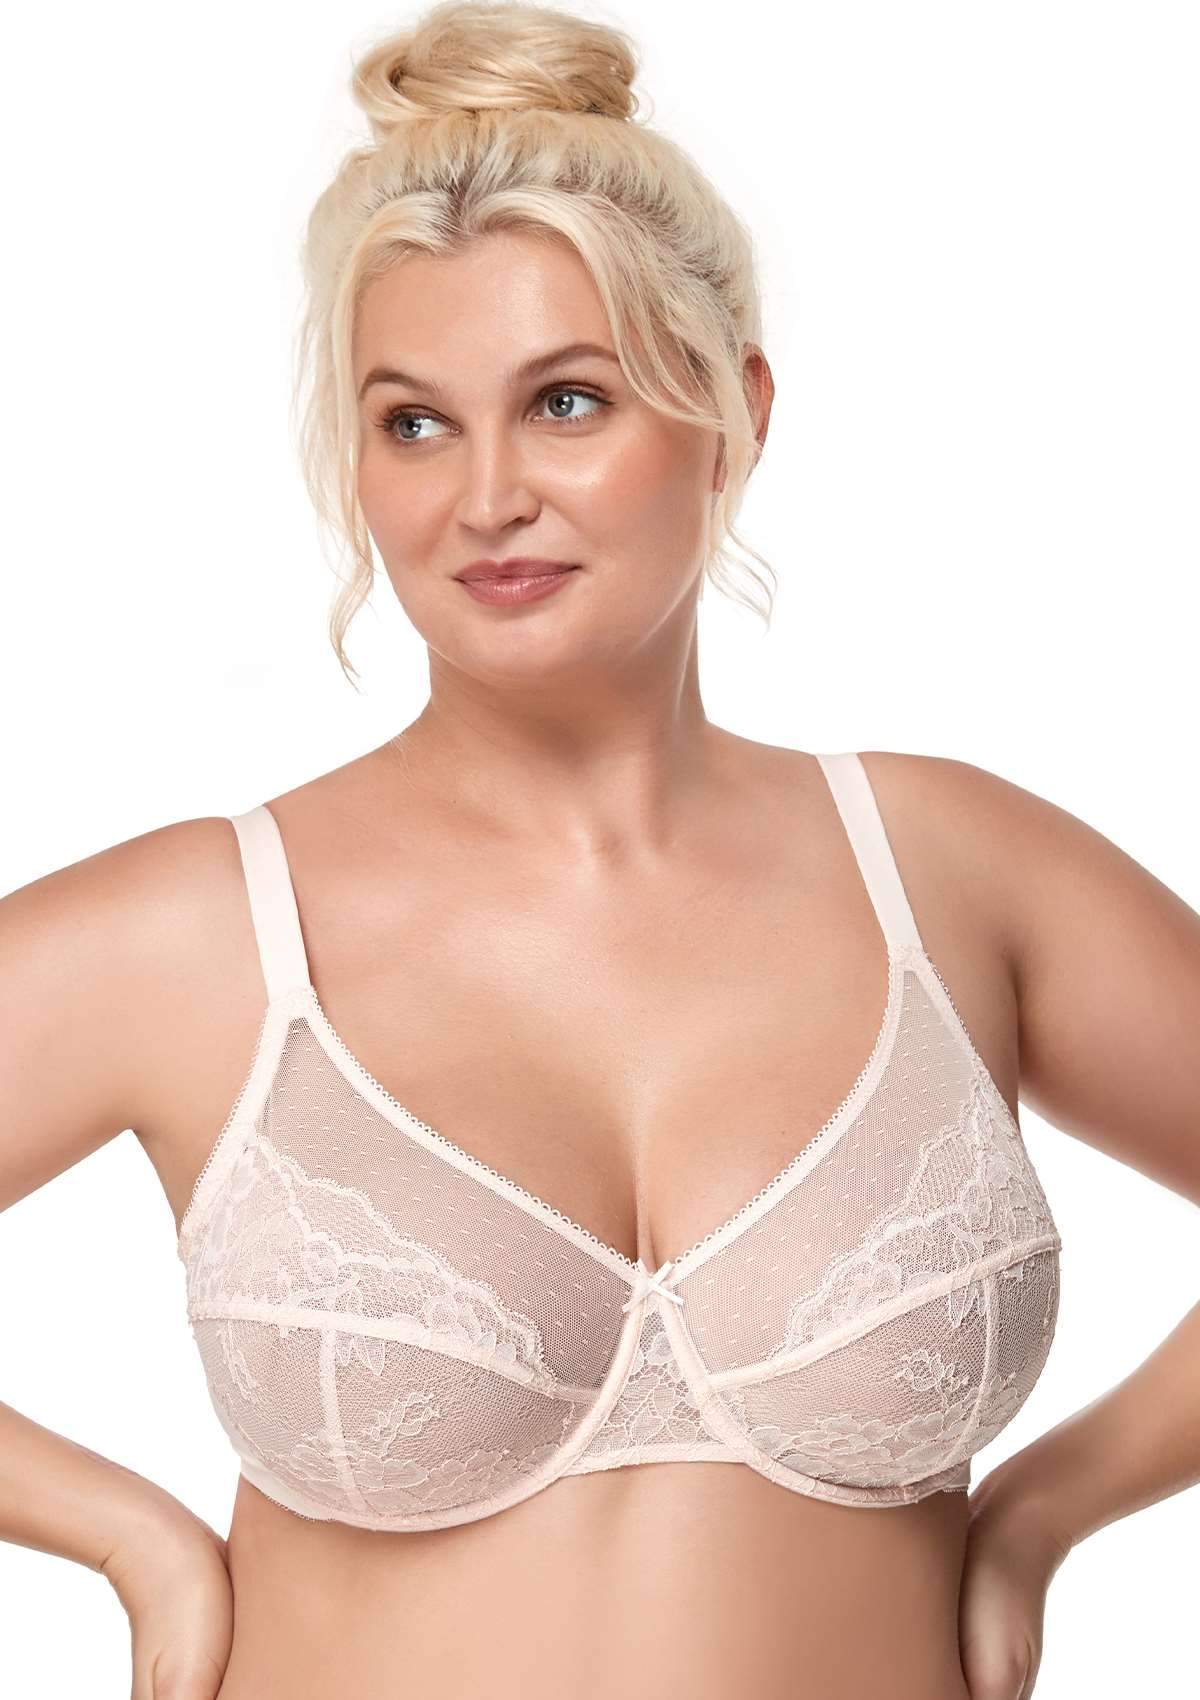 HSIA Enchante Lacy Bra: Comfy Sheer Lace Bra With Lift - Dusty Peach / 40 / D